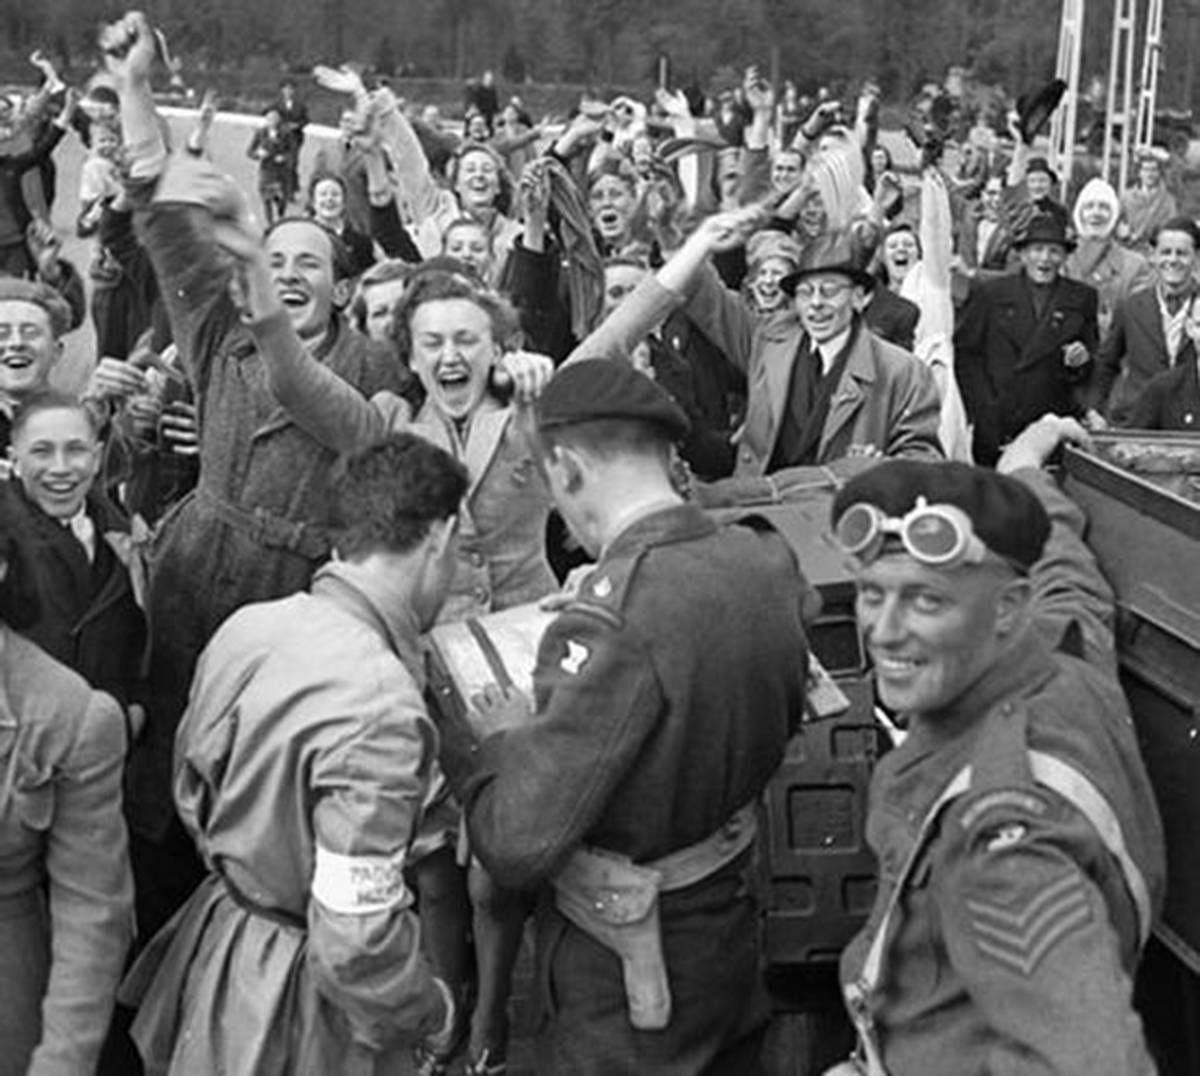 21465559_web1_200505-CPL-VEDAY-specialsection-fromVeteransCanada-VE-Day_2